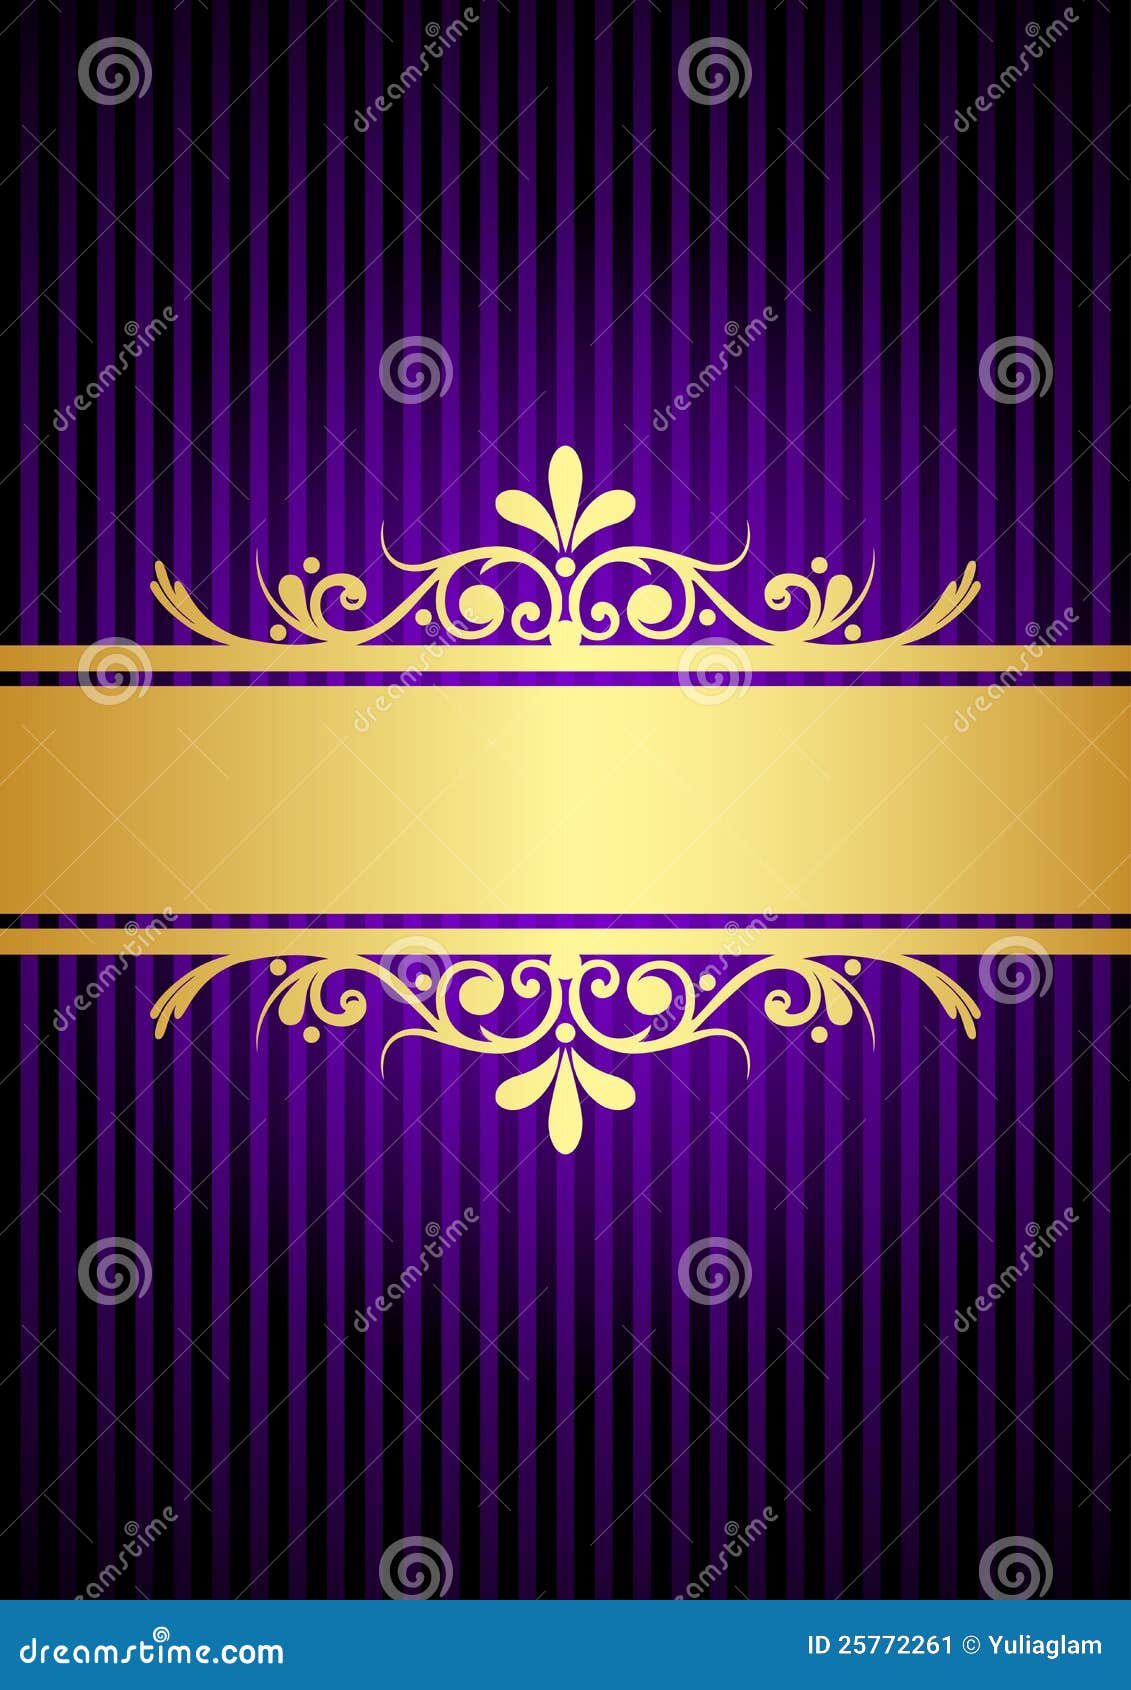 Gold And Purple Background Stock Image - Image: 25772261